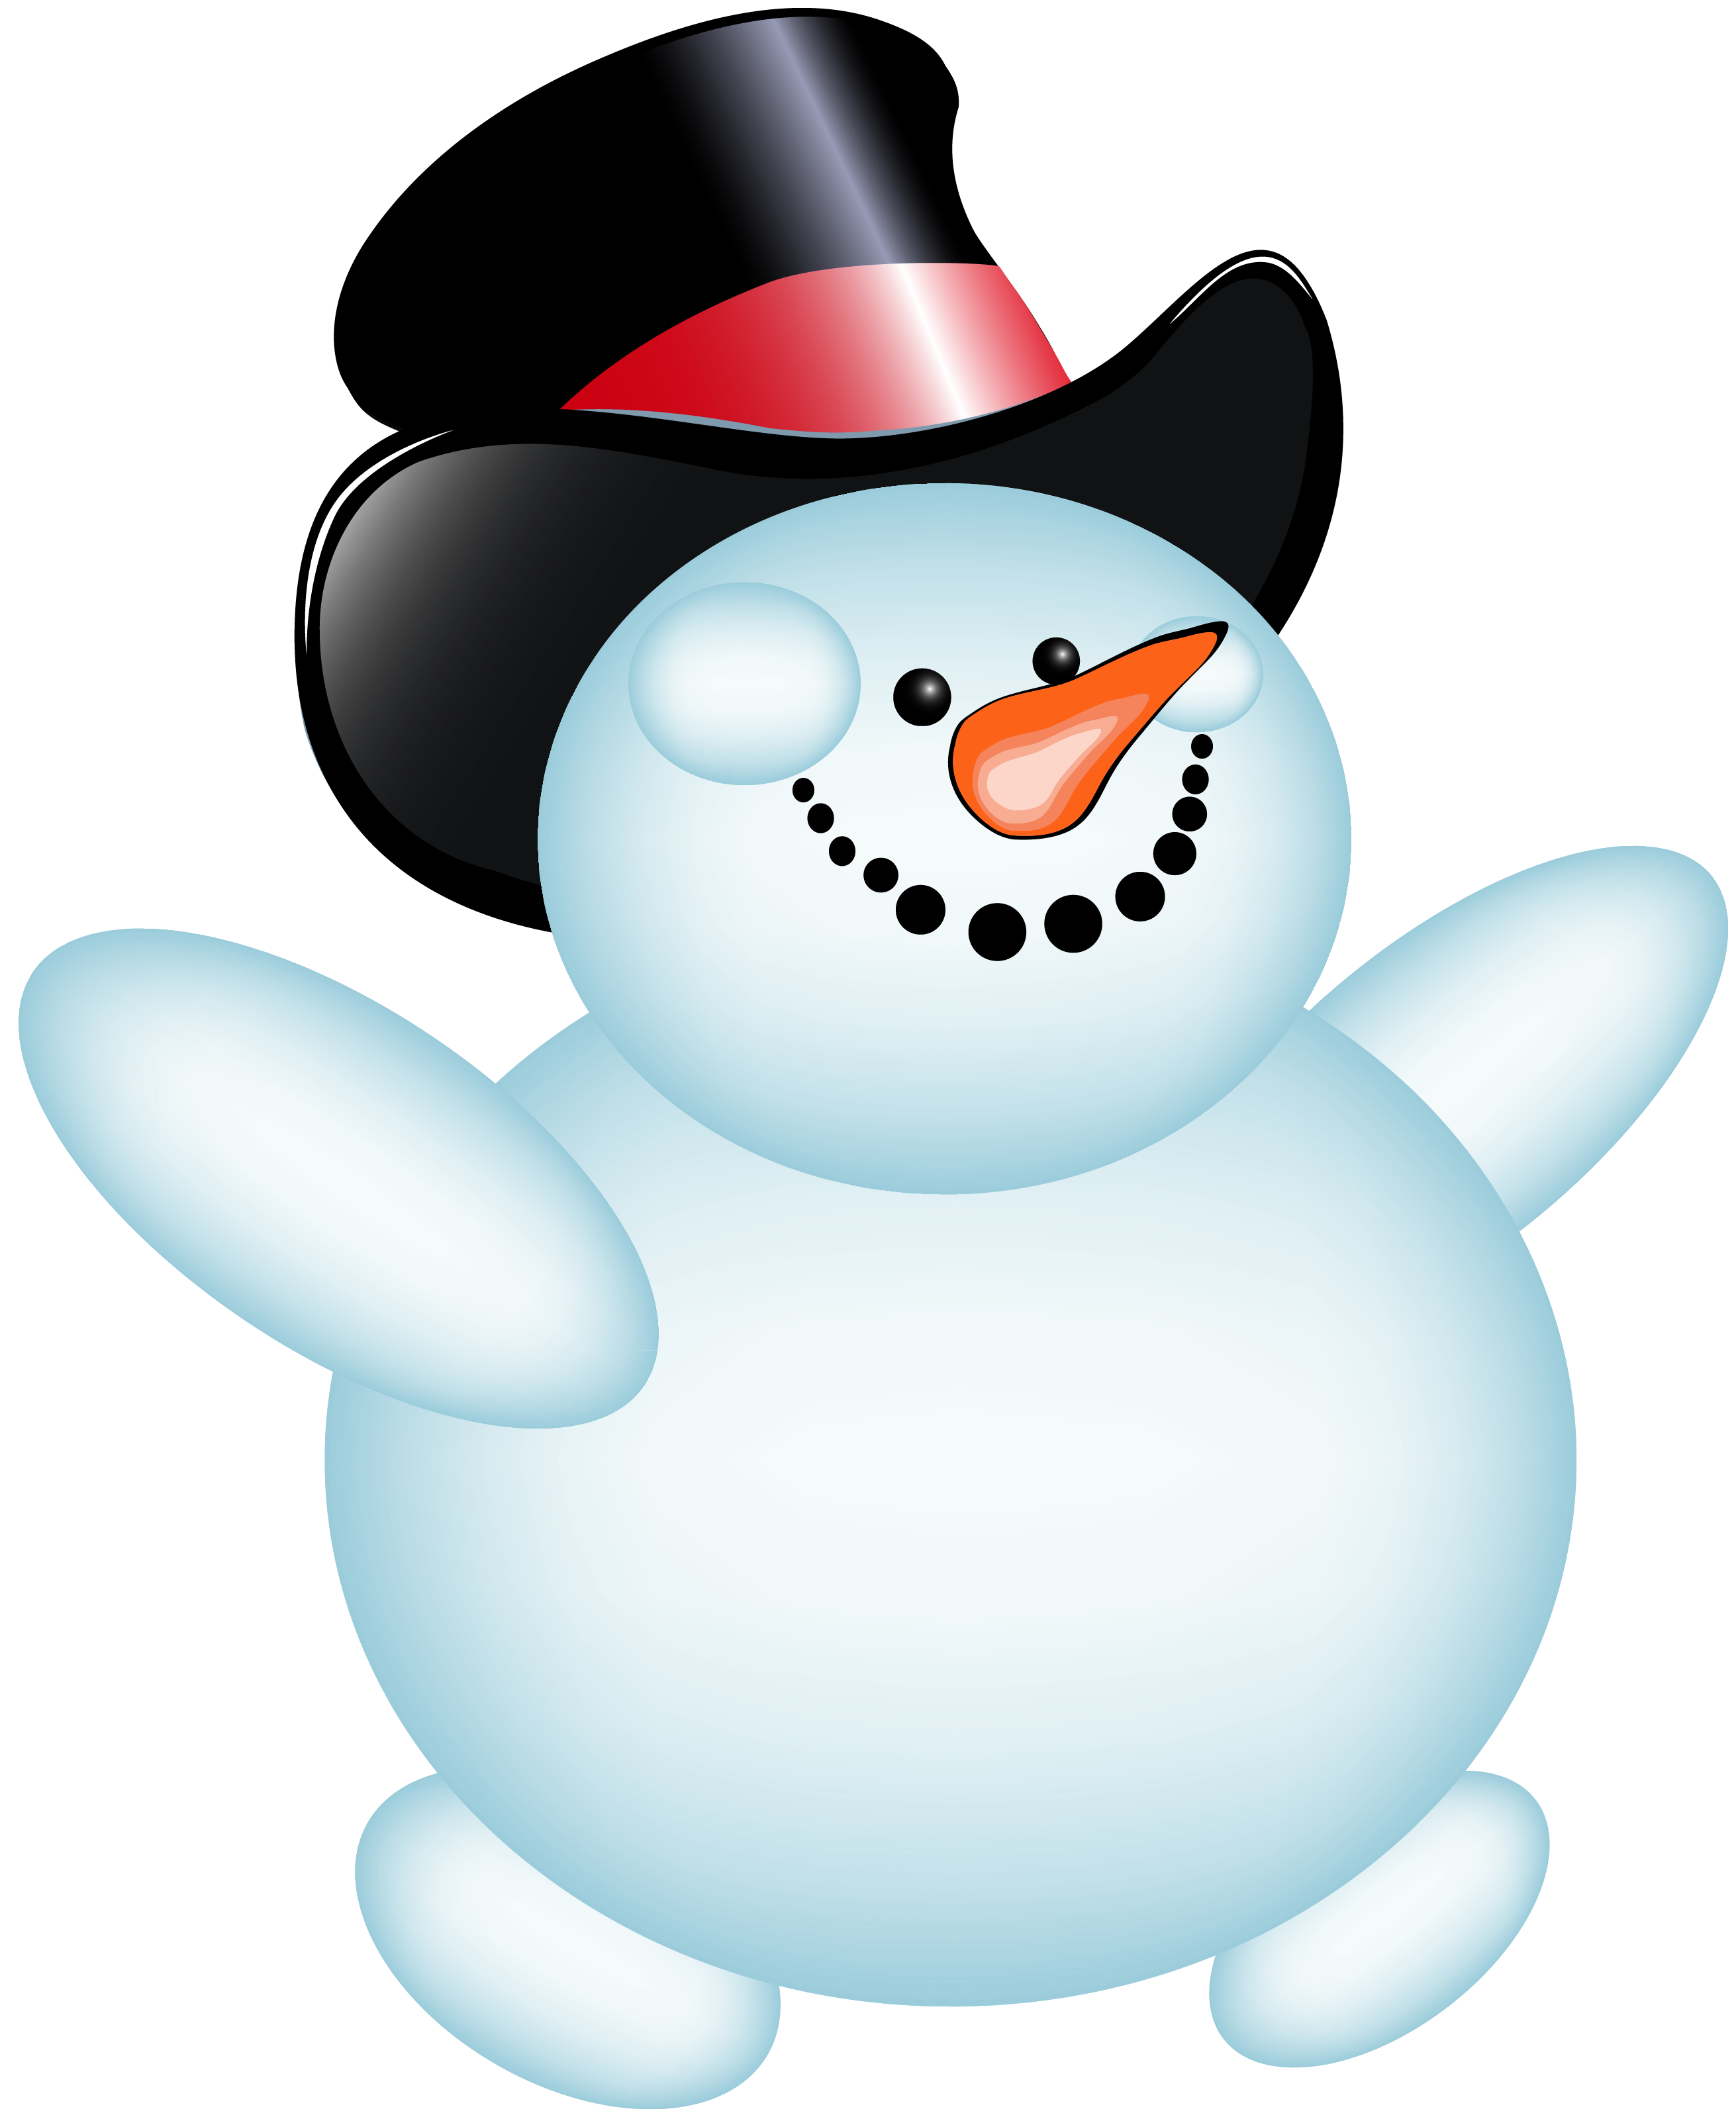 Free snowman clip art image snowman holding a blank sign for